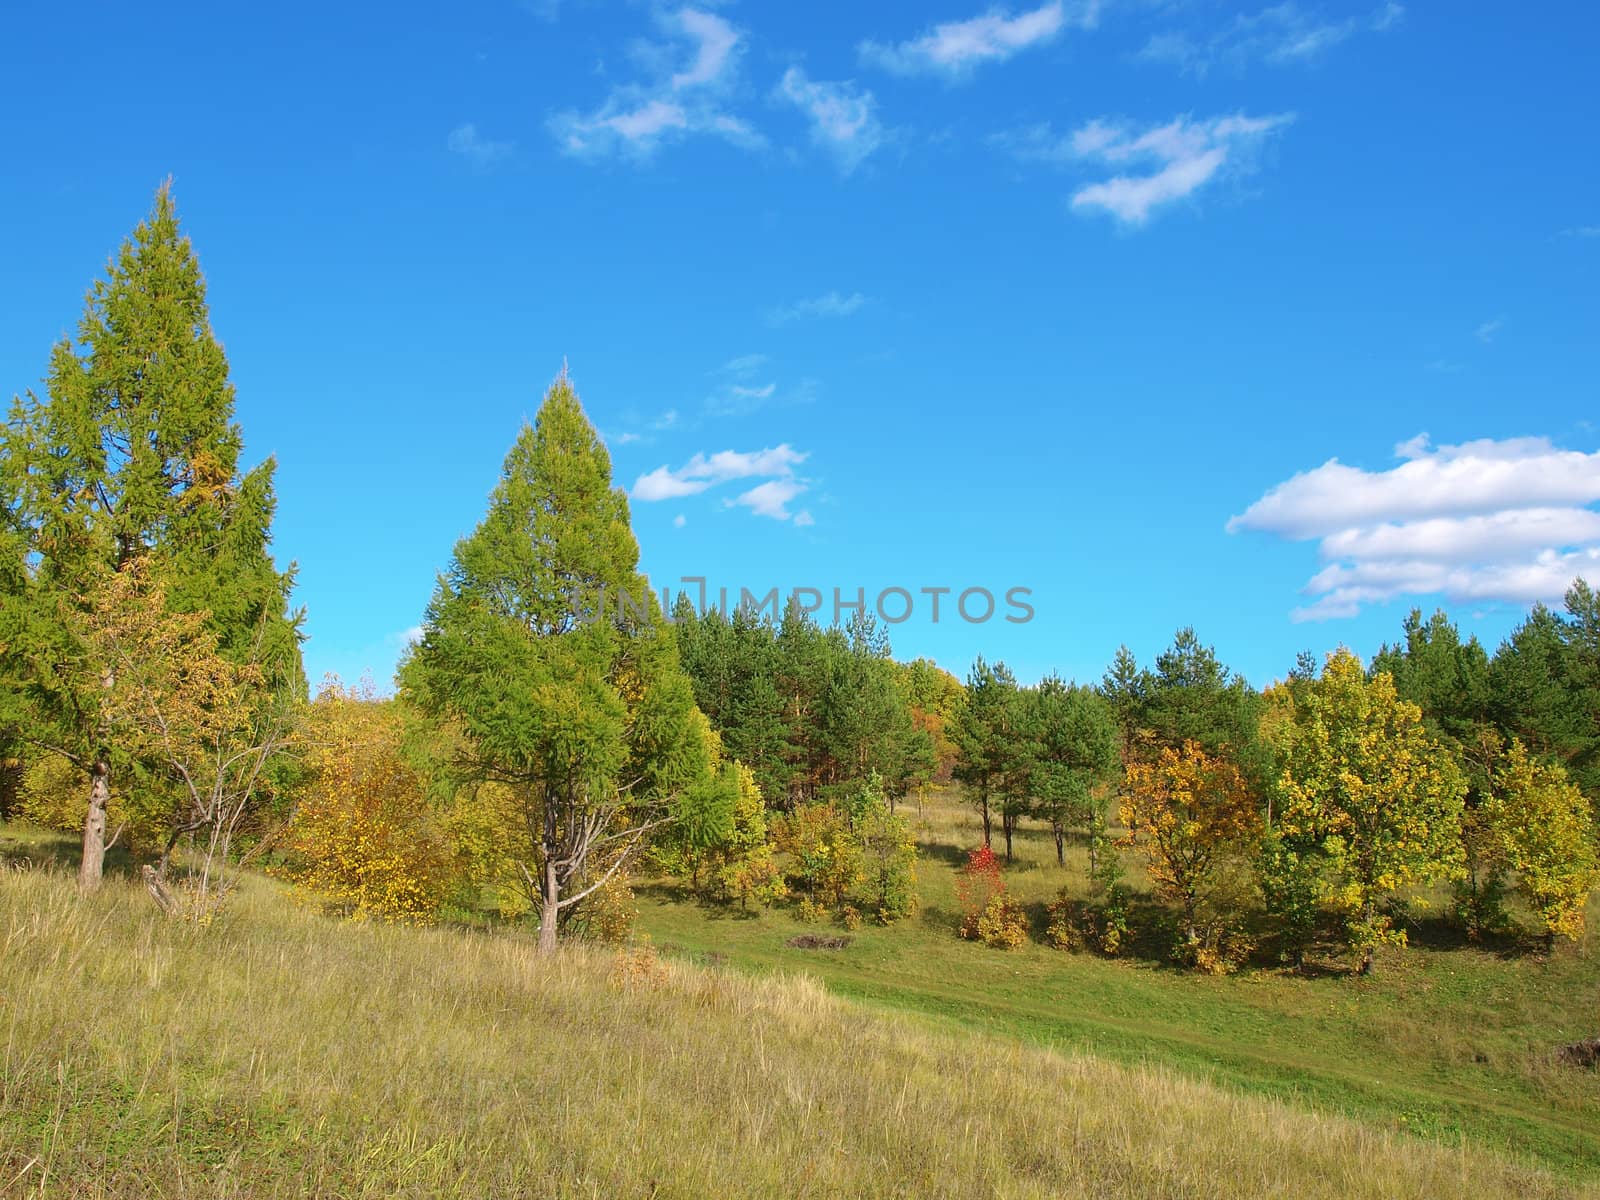 Autumn landscape with trees